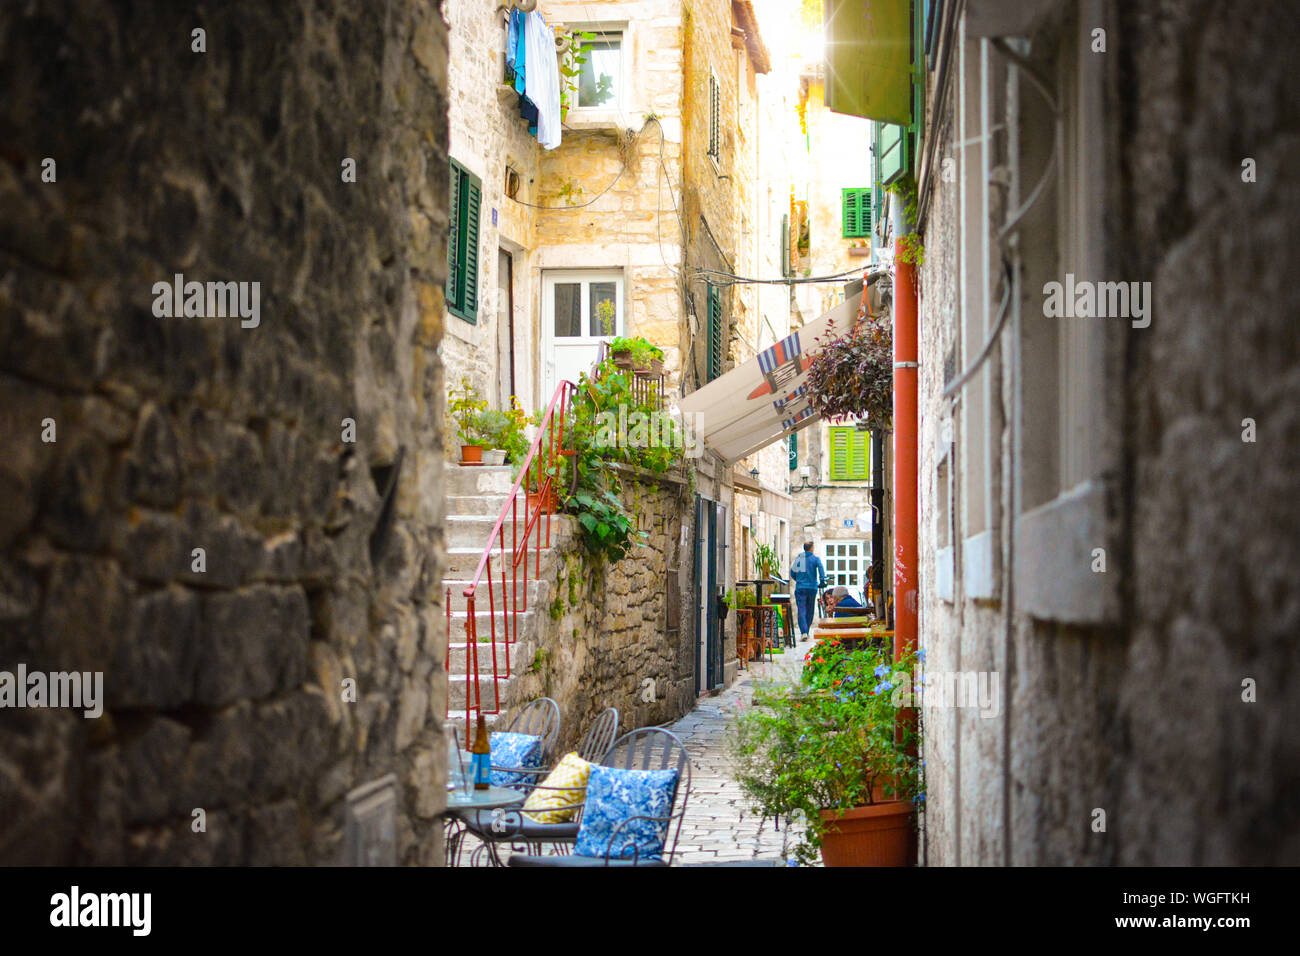 A shady, narrow alley off the beaten path in the old town residential section of Split Croatia with a man jogging. Stock Photo